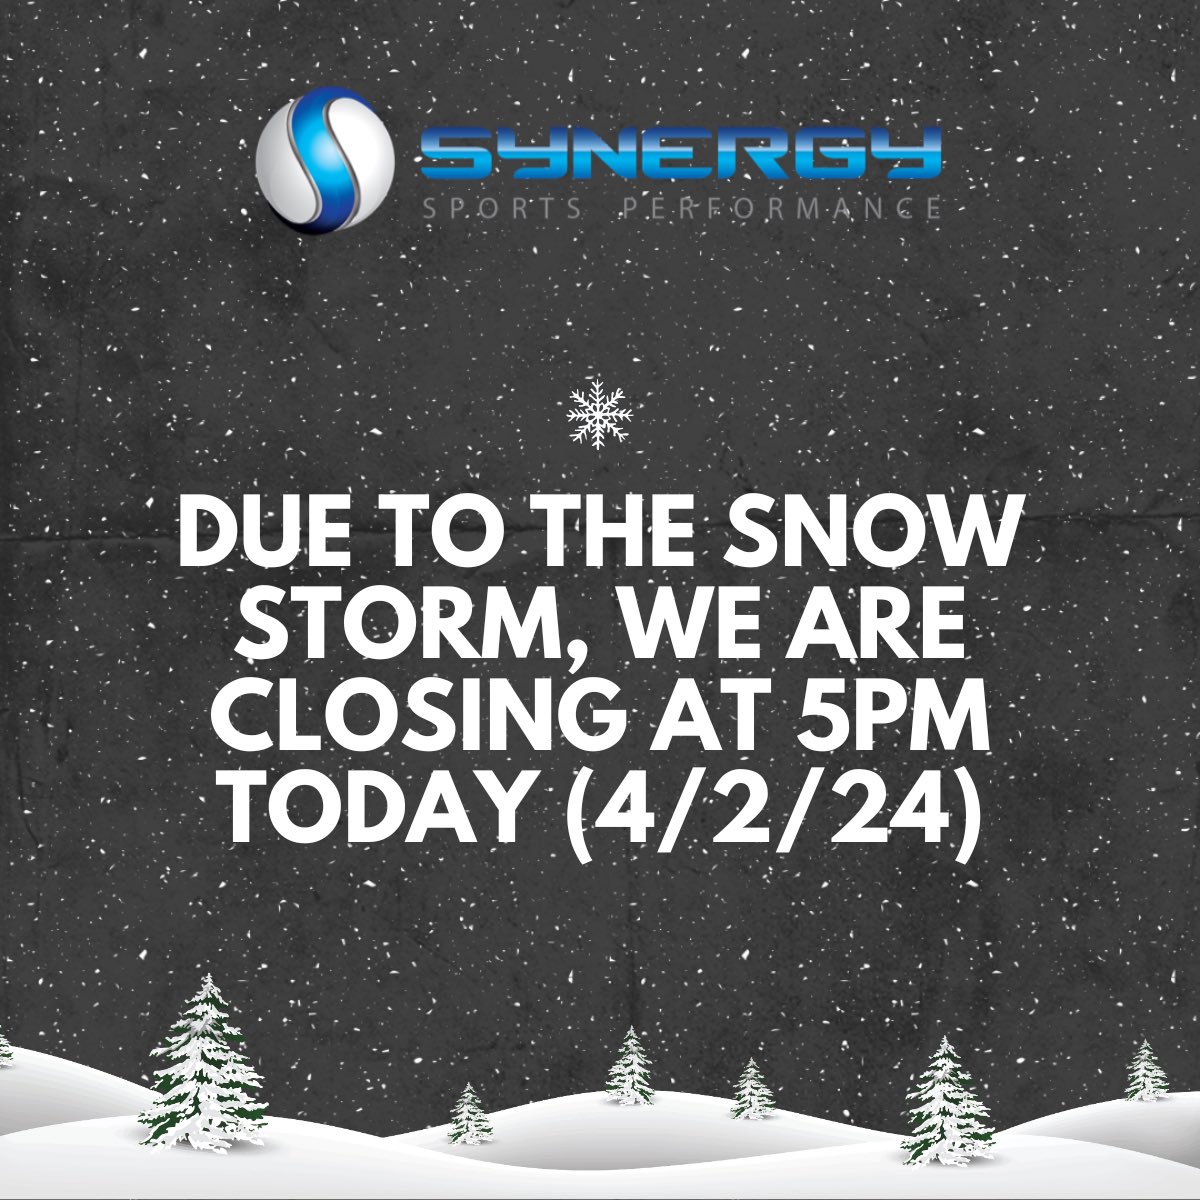 We will monitor the weather to determine when we can open Wednesday.